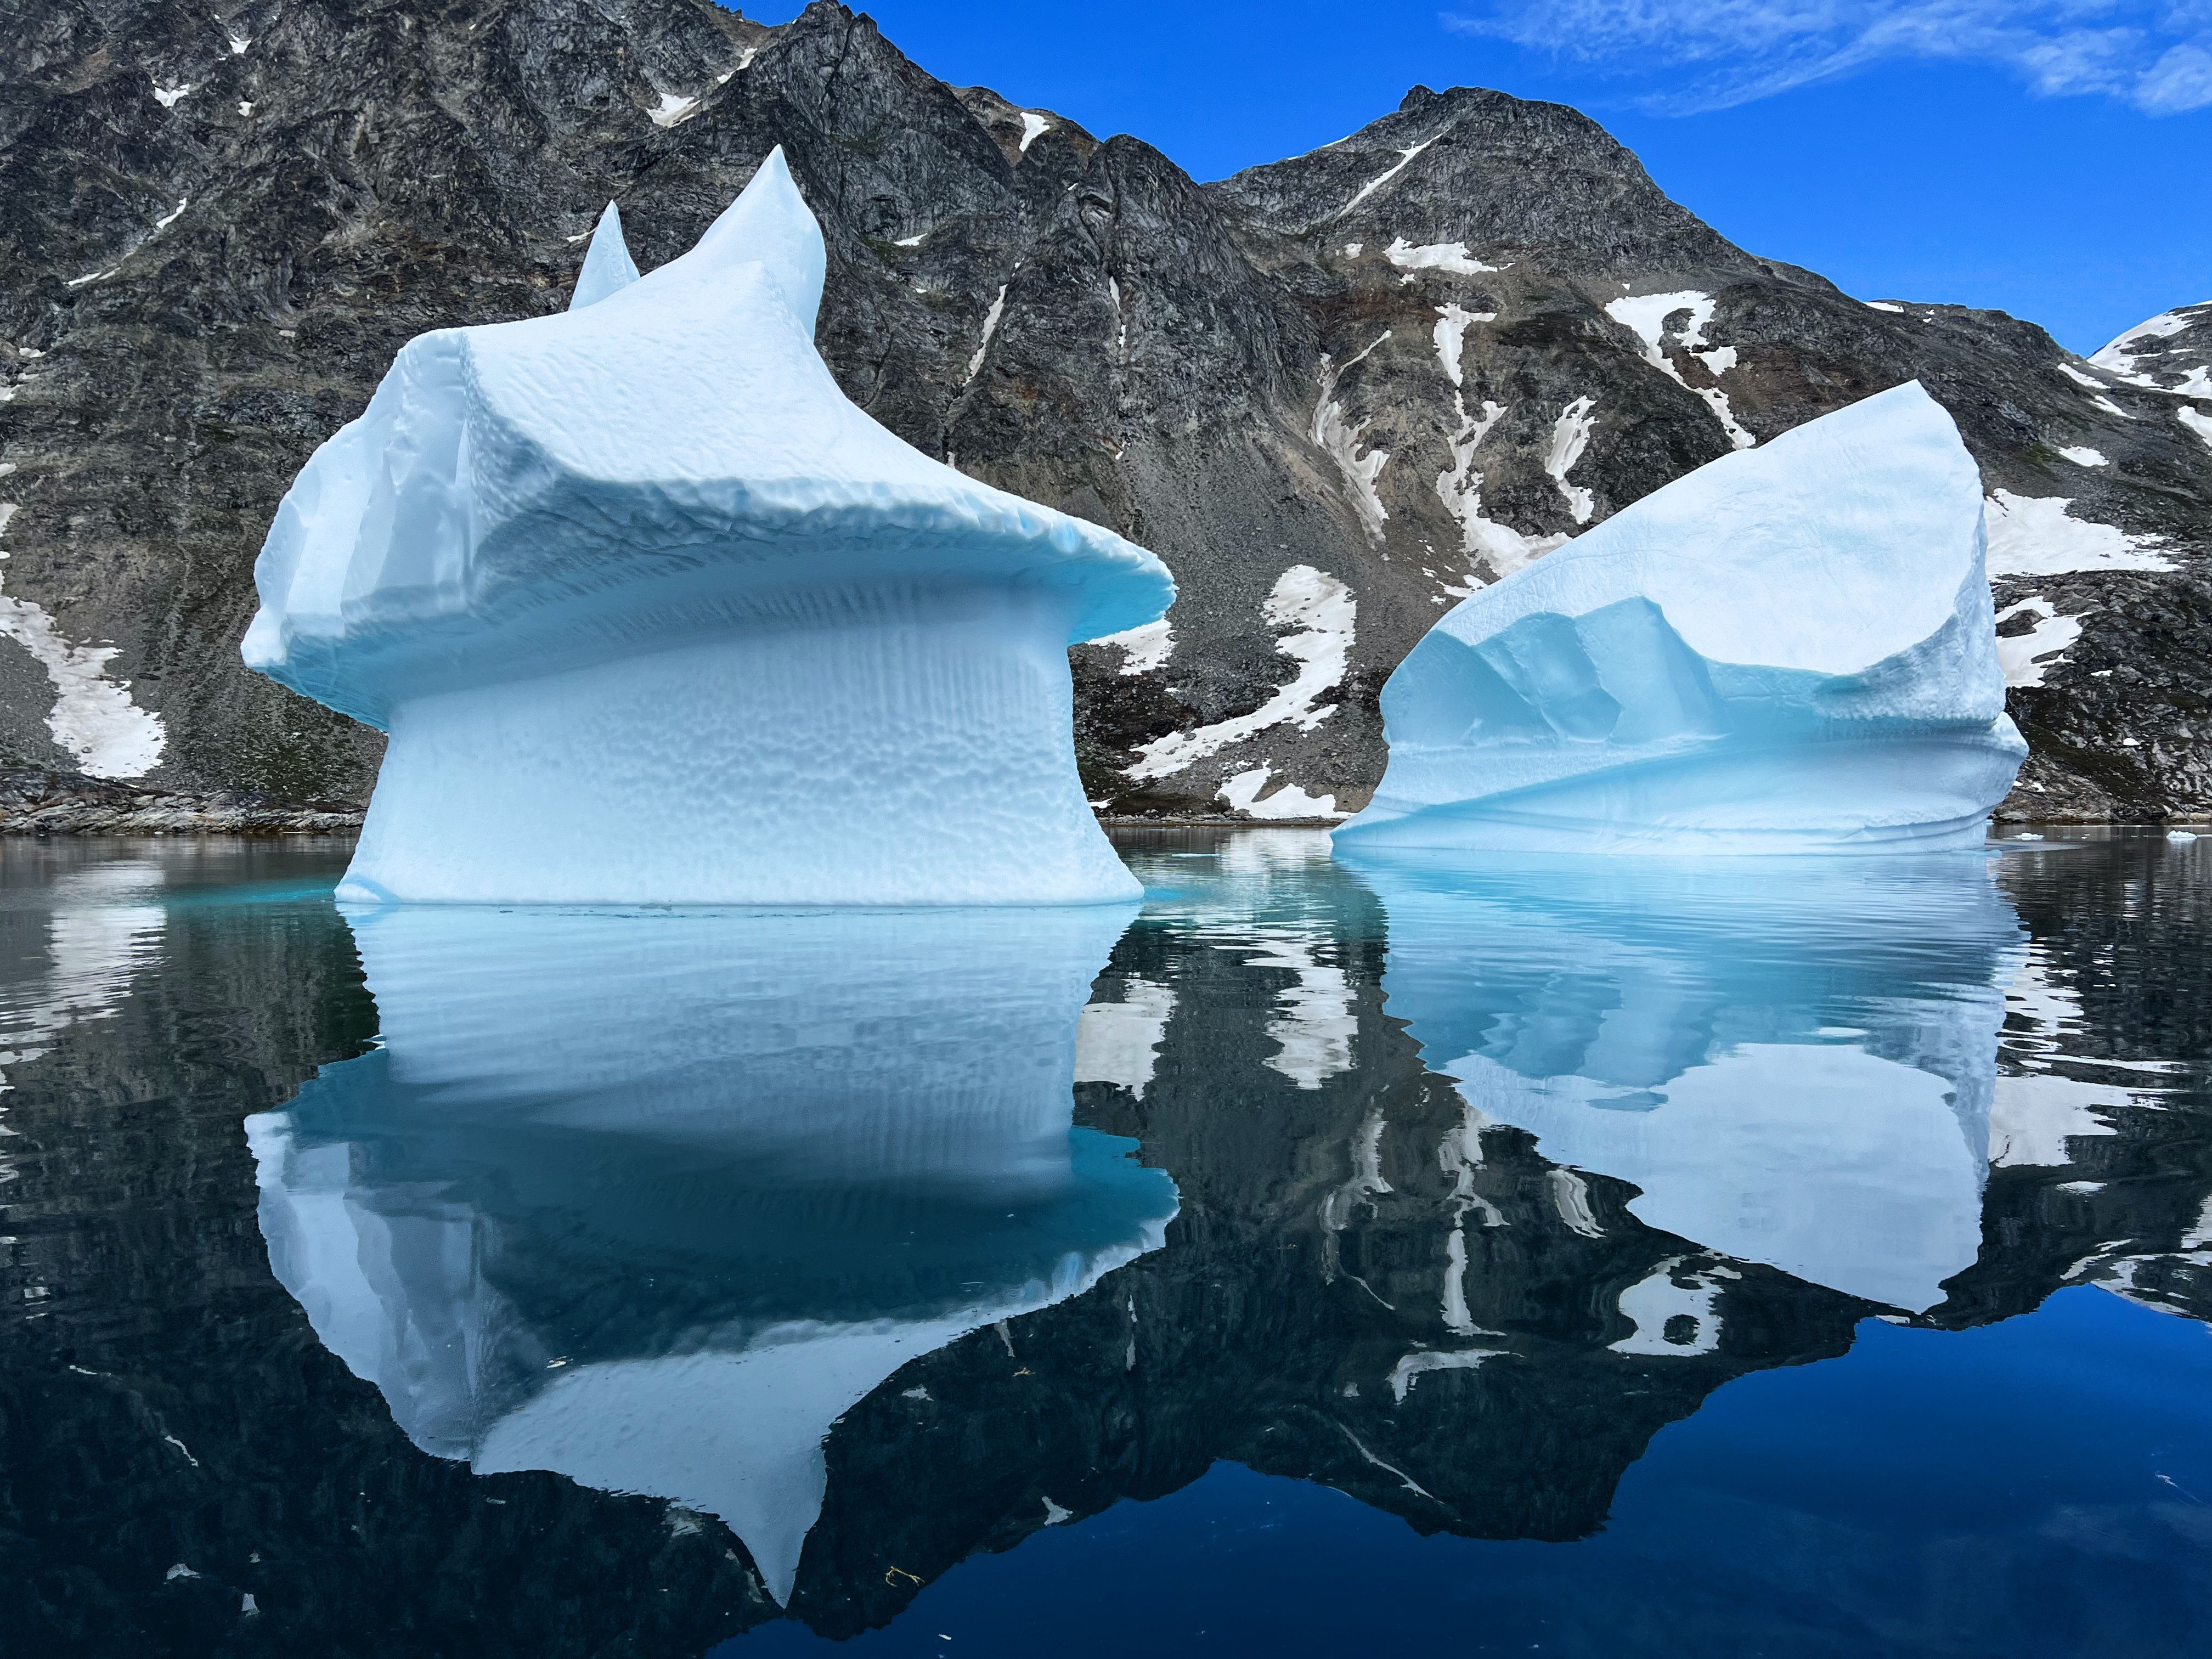 Icebergs are part of the lifecycle of glaciers ​ ​